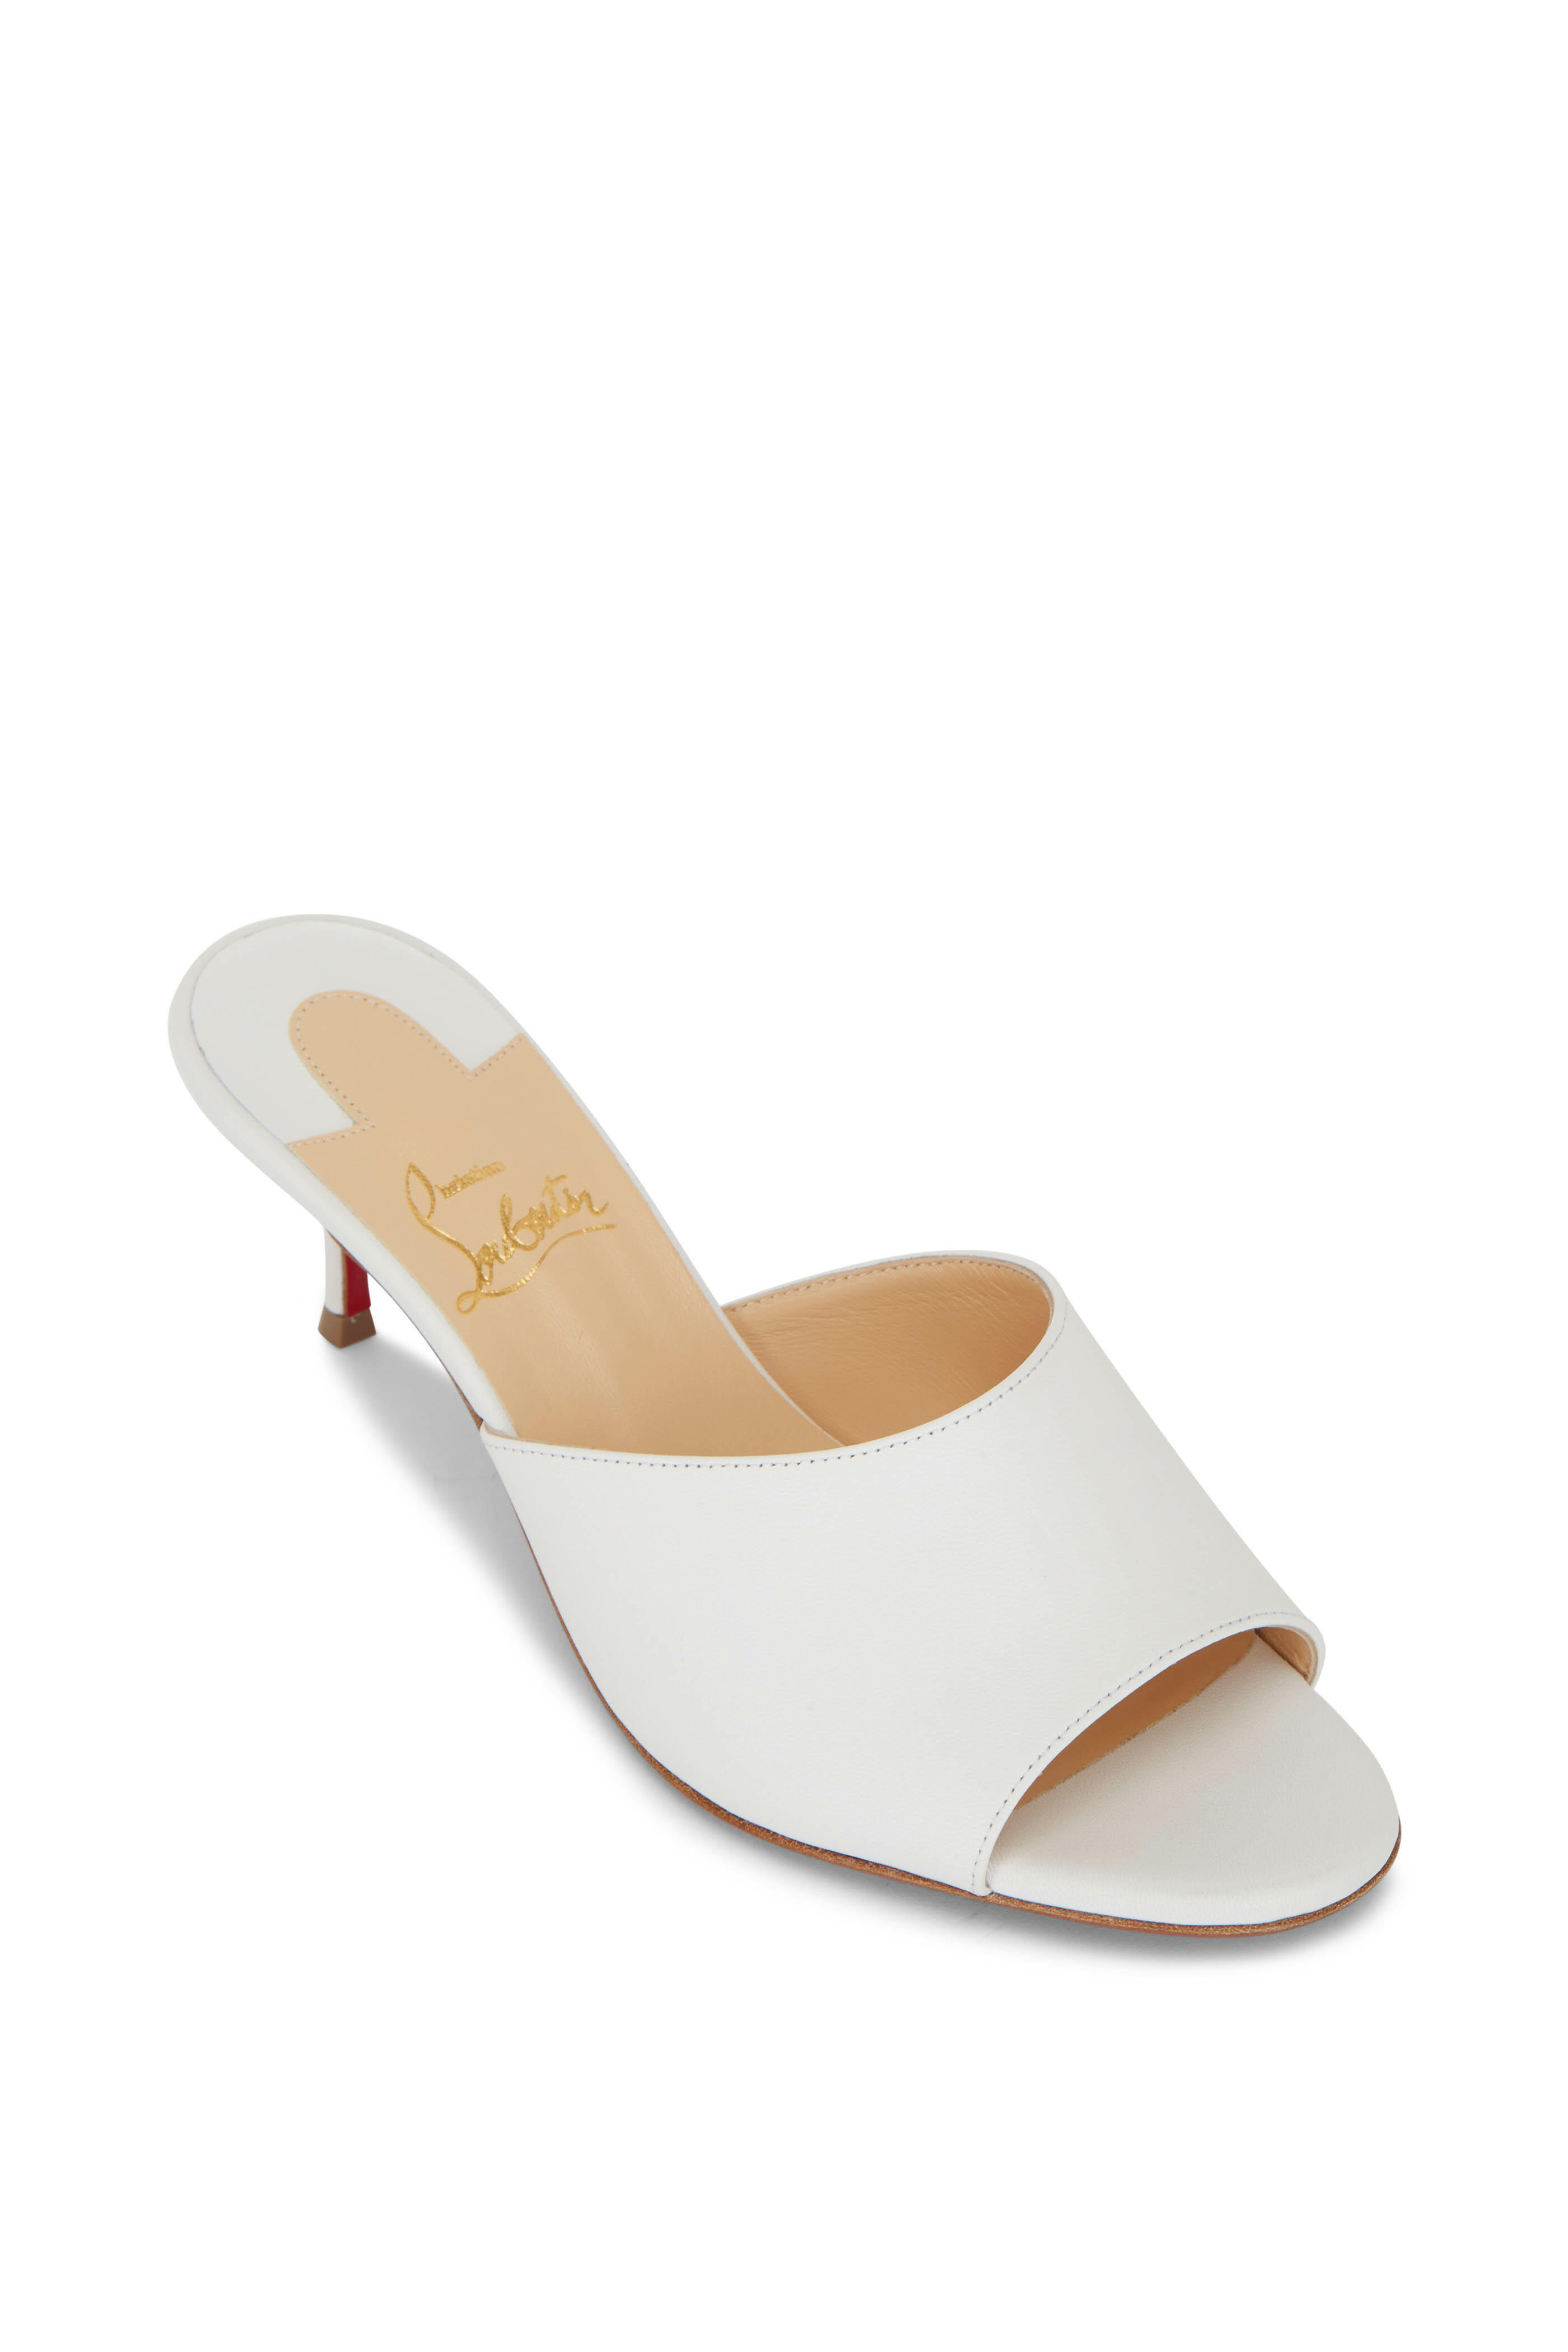 Christian Louboutin CL Leather Mules